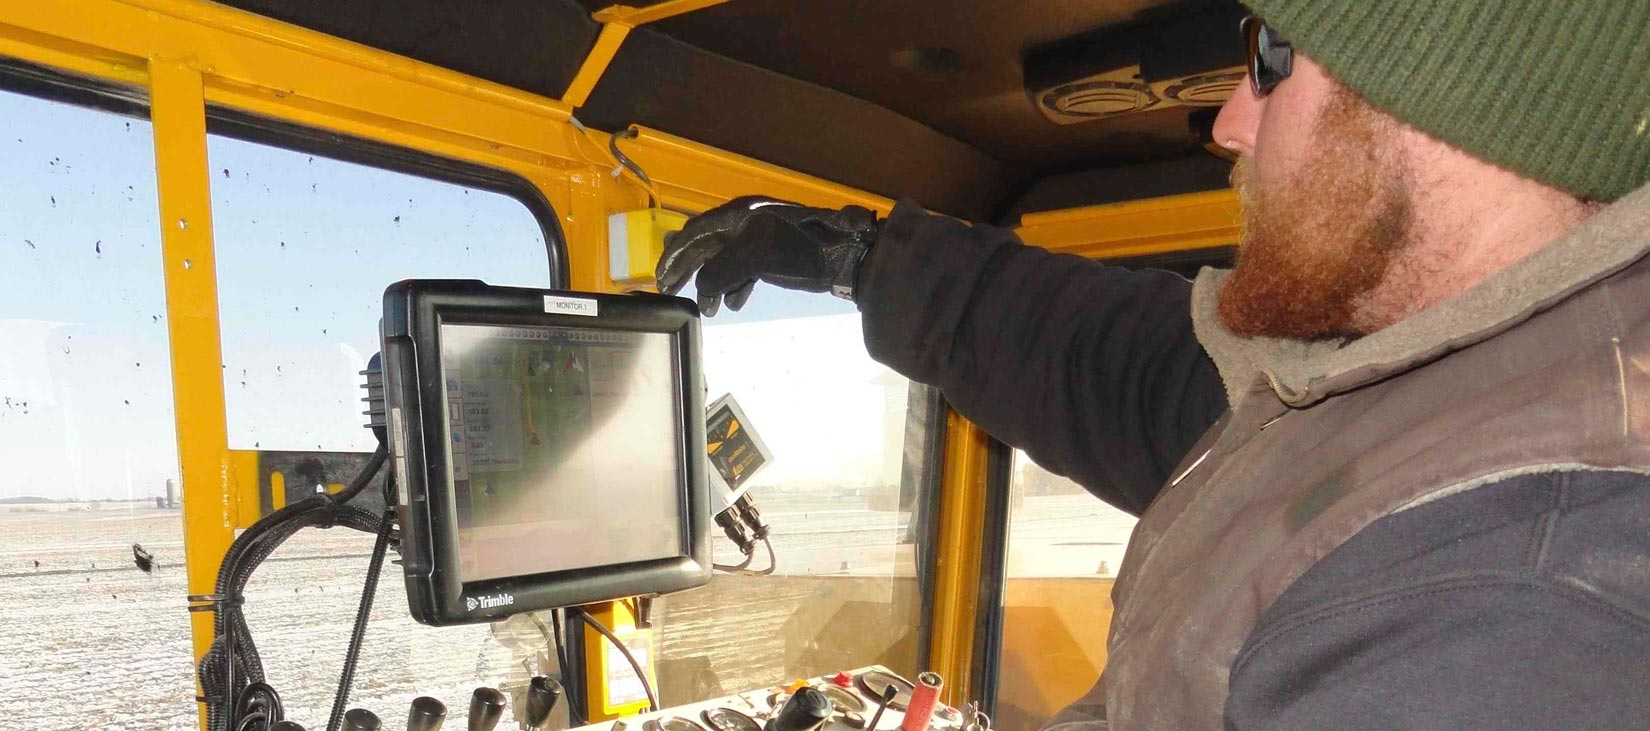 We Use a State of the Art Trimble GPS System to Map Out Your Field